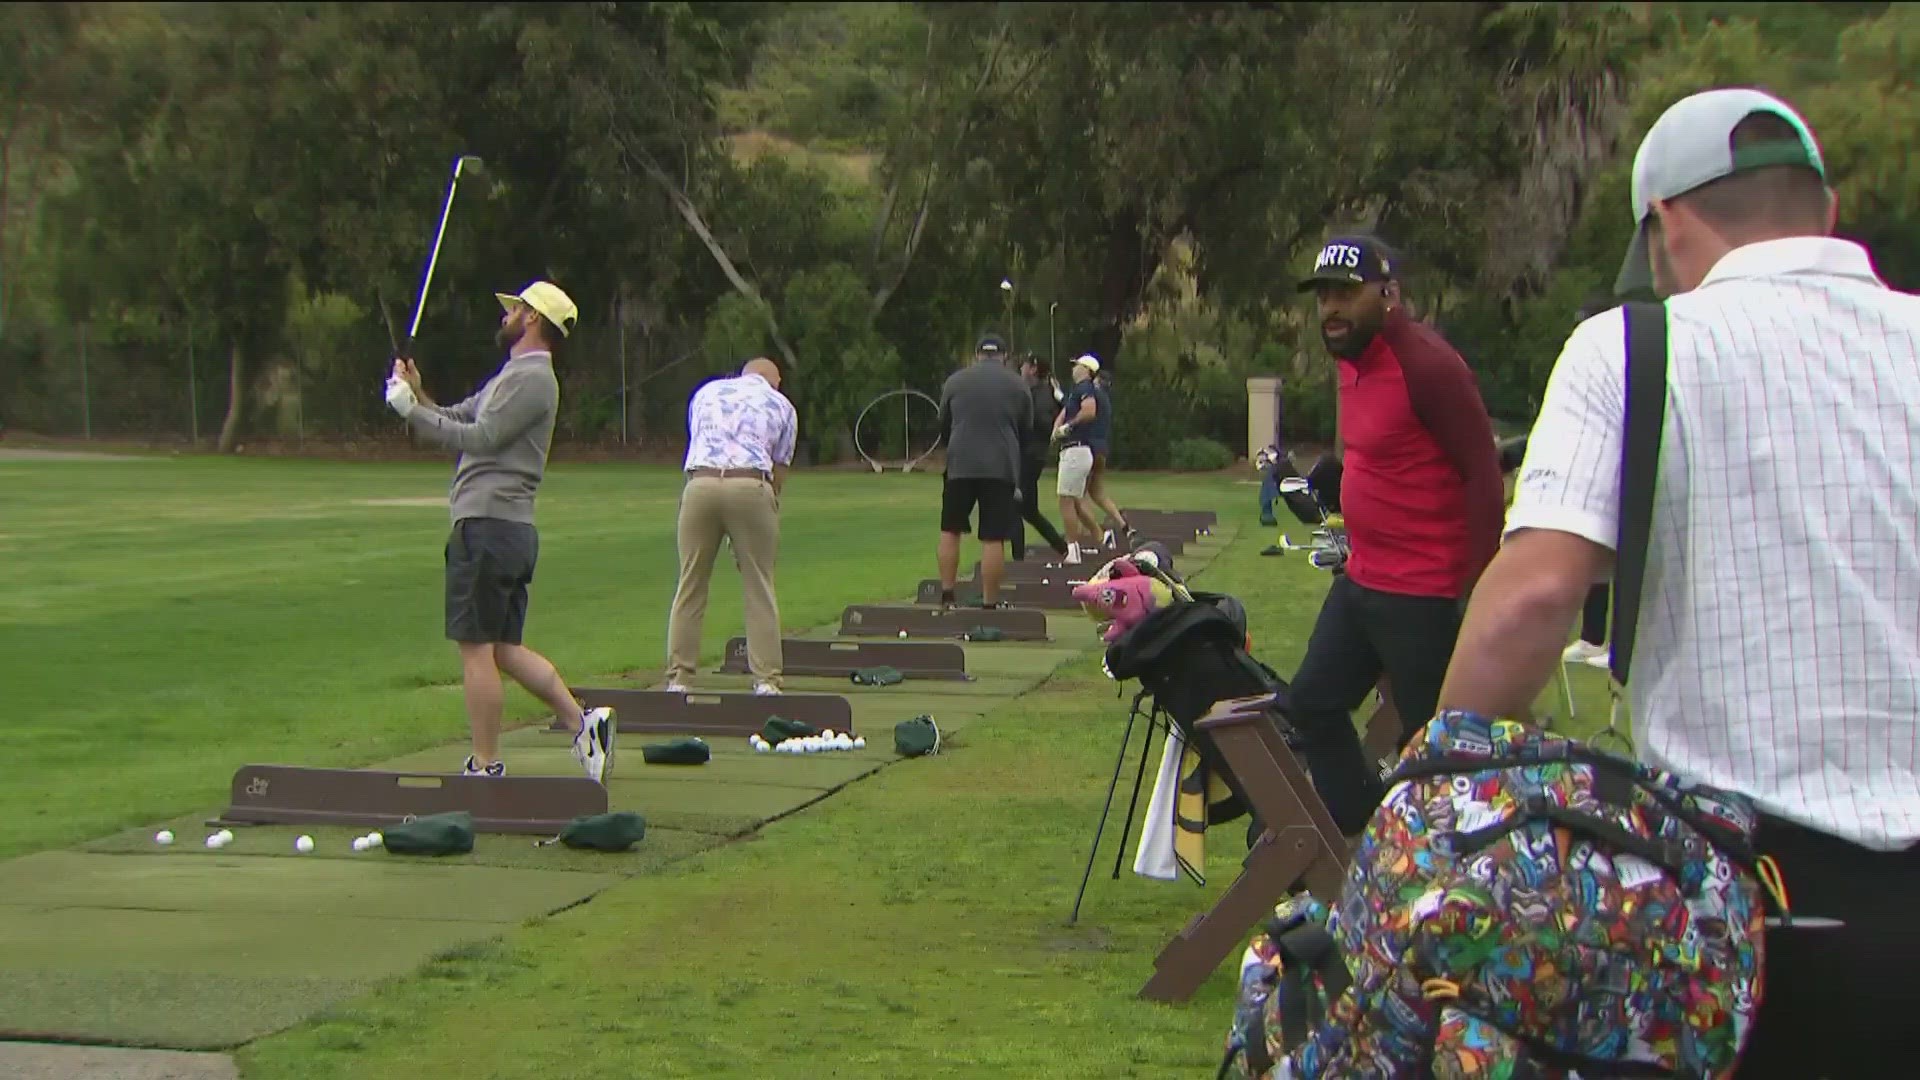 Andre Reed Golf Tournament kicks off in Fairbanks Ranch benefiting literacy initiatives at Boys & Girls Clubs worldwide.